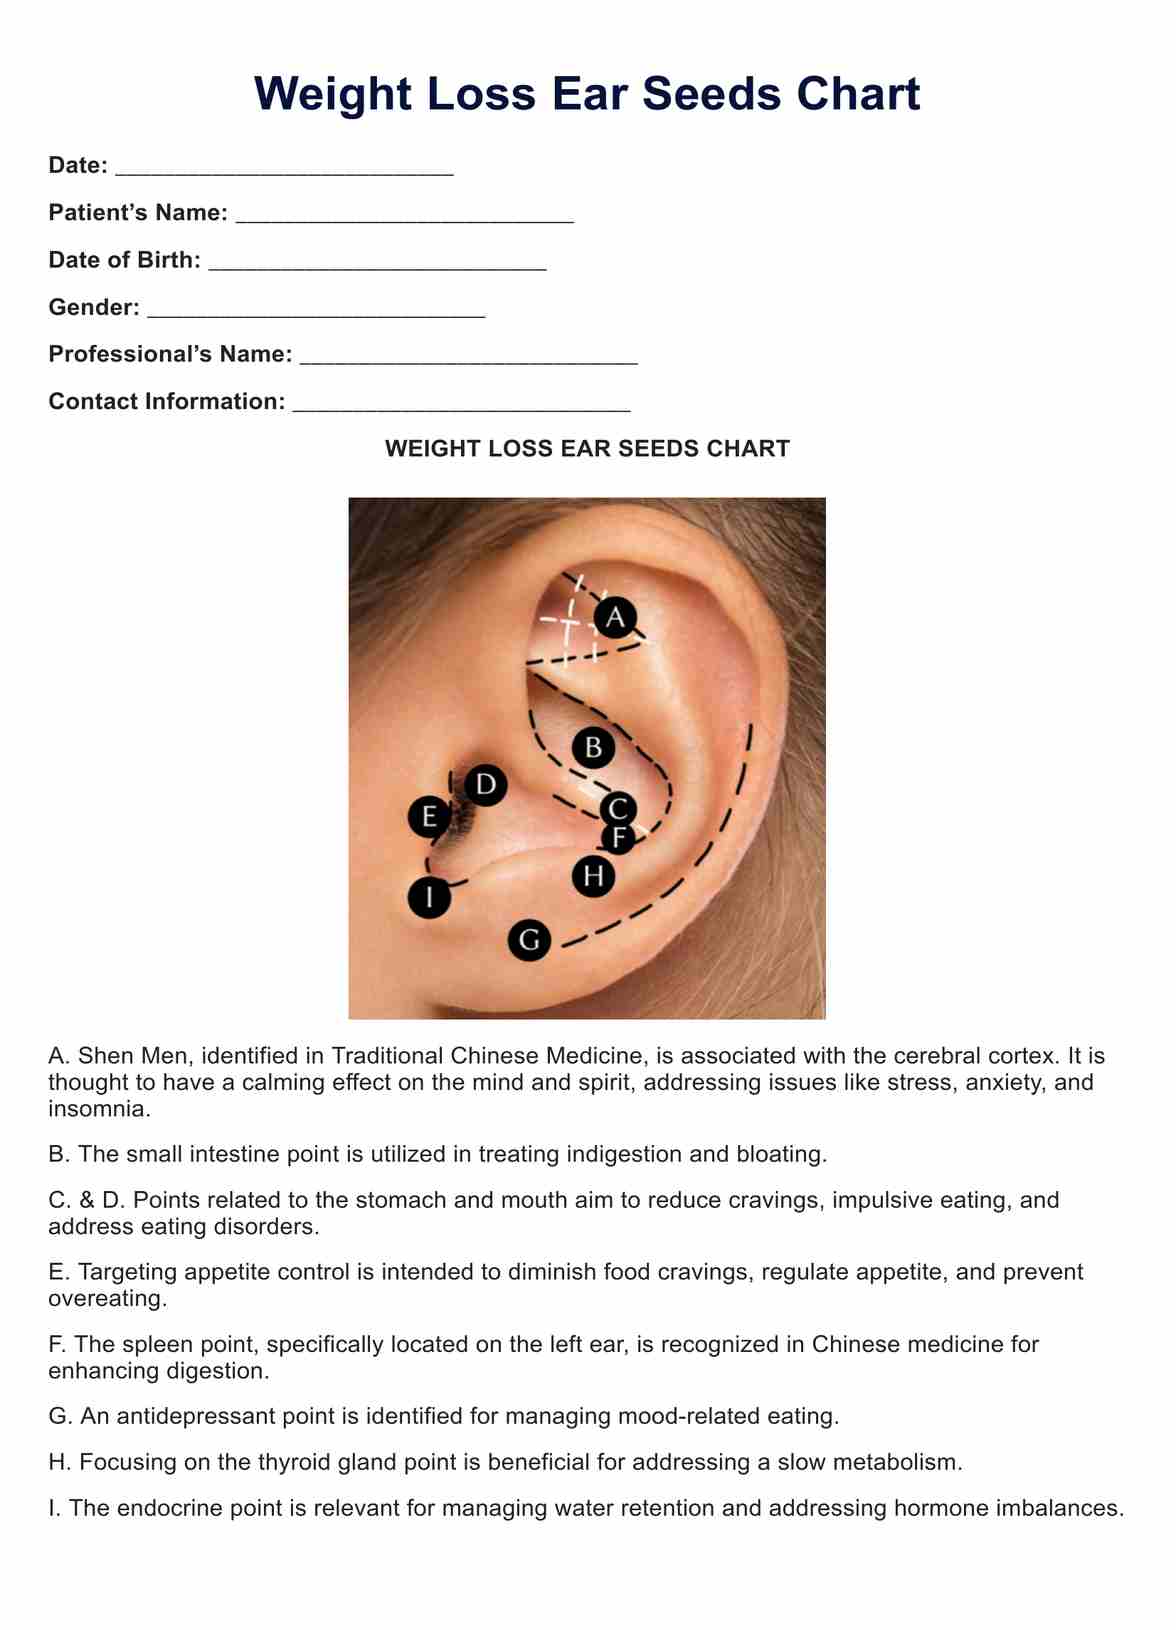 Weight Loss Ear Seeds Chart PDF Example